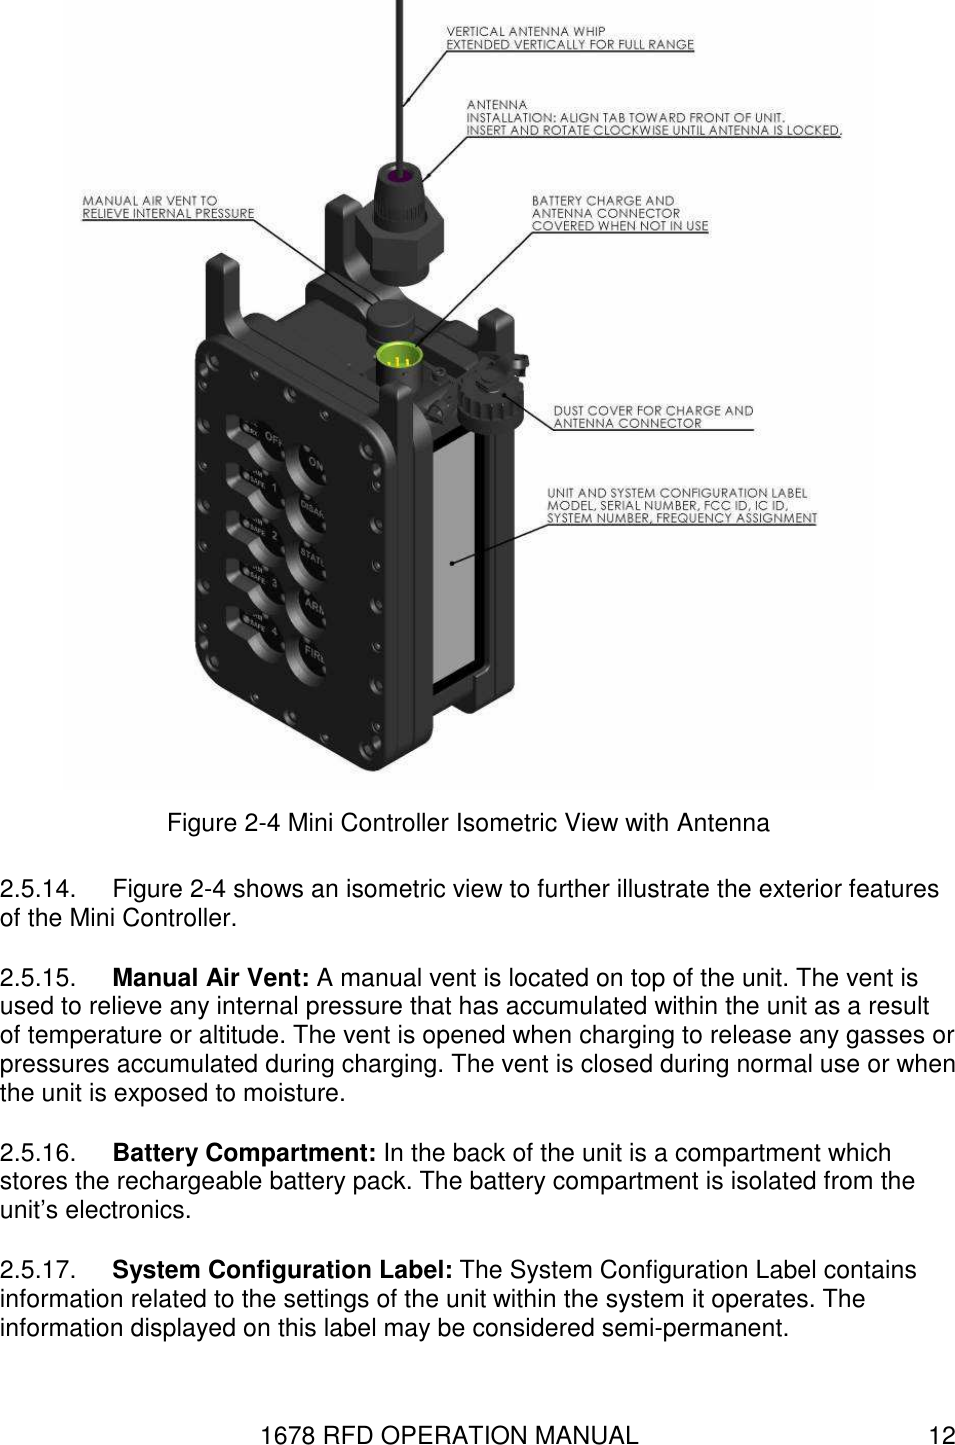 1678 RFD OPERATION MANUAL  12  Figure 2-4 Mini Controller Isometric View with Antenna 2.5.14.  Figure 2-4 shows an isometric view to further illustrate the exterior features of the Mini Controller. 2.5.15.  Manual Air Vent: A manual vent is located on top of the unit. The vent is used to relieve any internal pressure that has accumulated within the unit as a result of temperature or altitude. The vent is opened when charging to release any gasses or pressures accumulated during charging. The vent is closed during normal use or when the unit is exposed to moisture. 2.5.16.  Battery Compartment: In the back of the unit is a compartment which stores the rechargeable battery pack. The battery compartment is isolated from the unit’s electronics. 2.5.17.  System Configuration Label: The System Configuration Label contains information related to the settings of the unit within the system it operates. The information displayed on this label may be considered semi-permanent. 